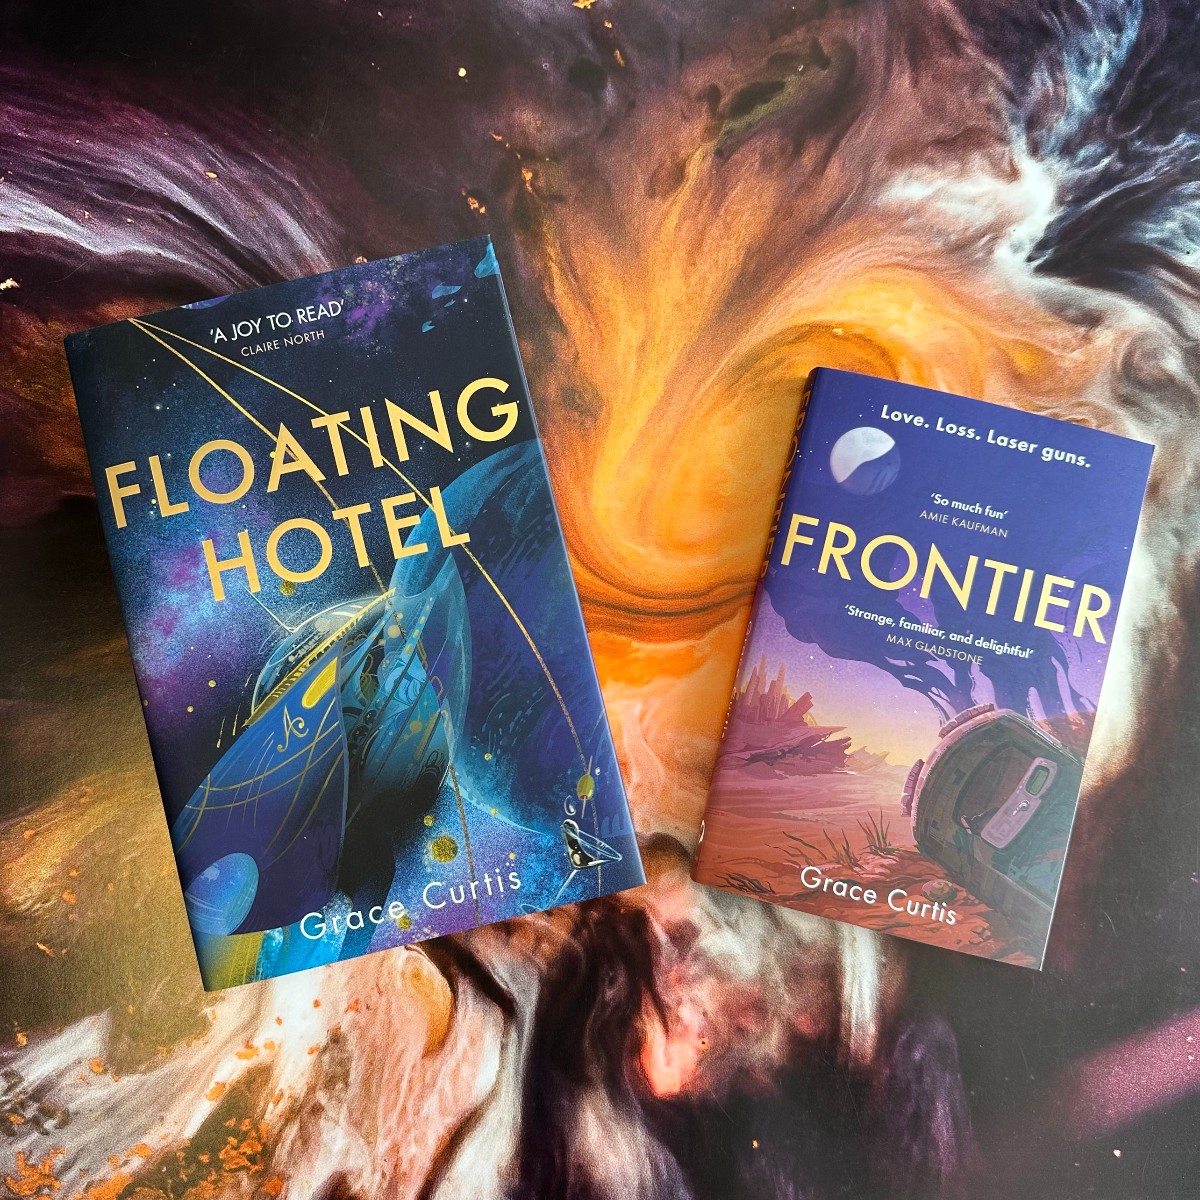 Floating Hotel by @GracinhaWrites is OUT NOW - escape to space with this cosy sci-fi adventure😍 AND check out Frontier a heartfelt queer romance also set in space, out today too but in paperback⭐ Floating Hotel: brnw.ch/21wI69s Frontier: brnw.ch/21wI69r